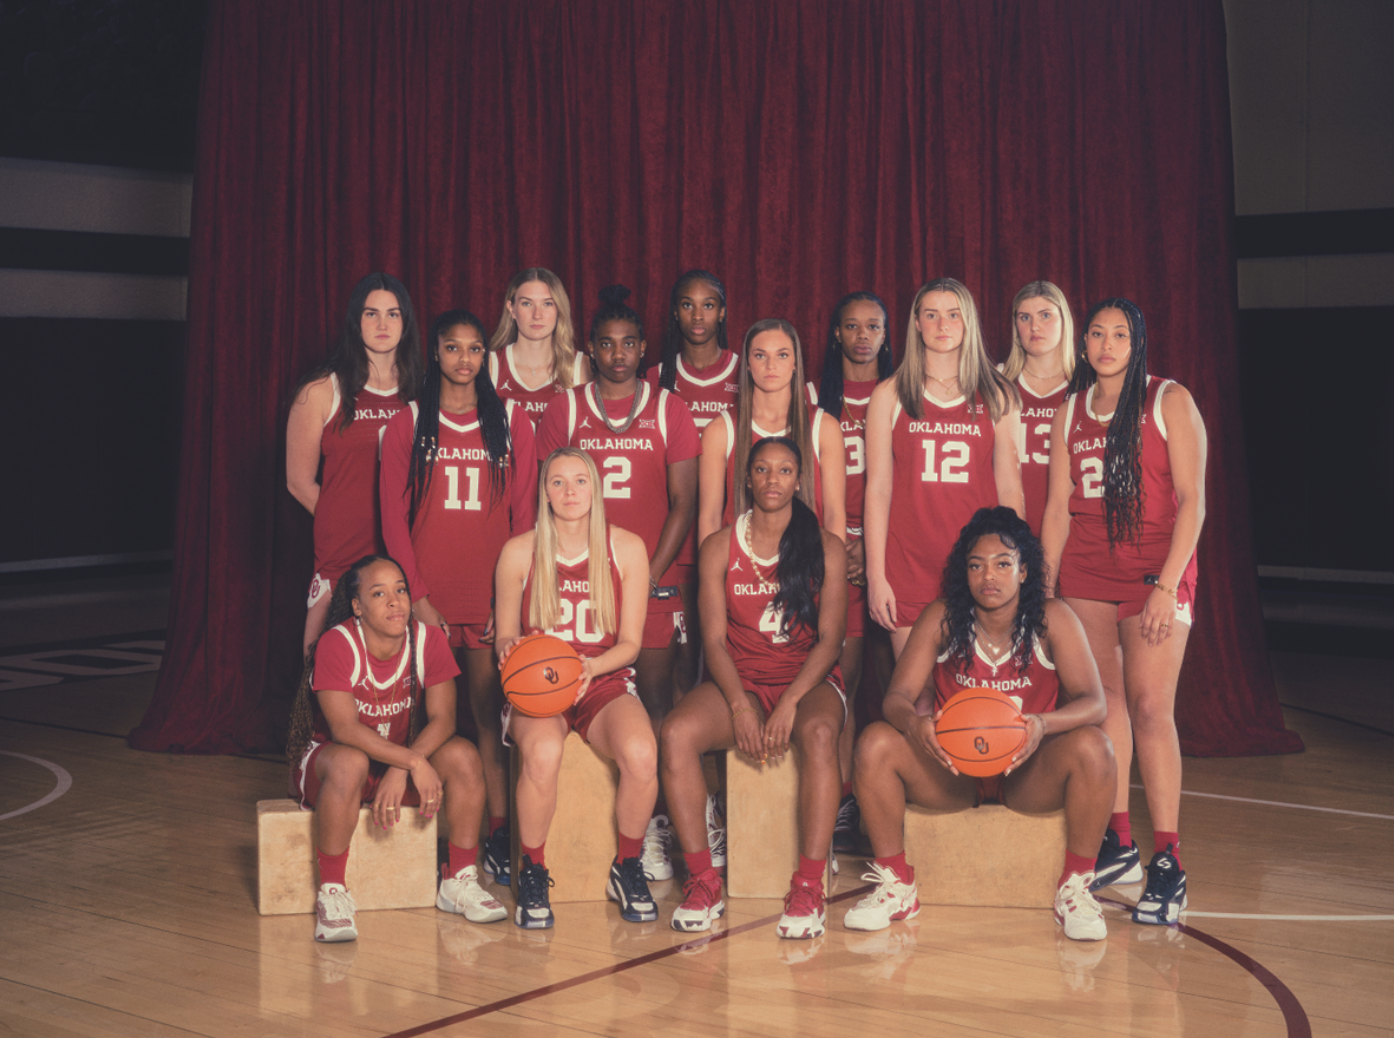 The 2023 Jumpman Invitational: Oklahoma Women’s Team Look to Bring Glory Back to the Sooner State